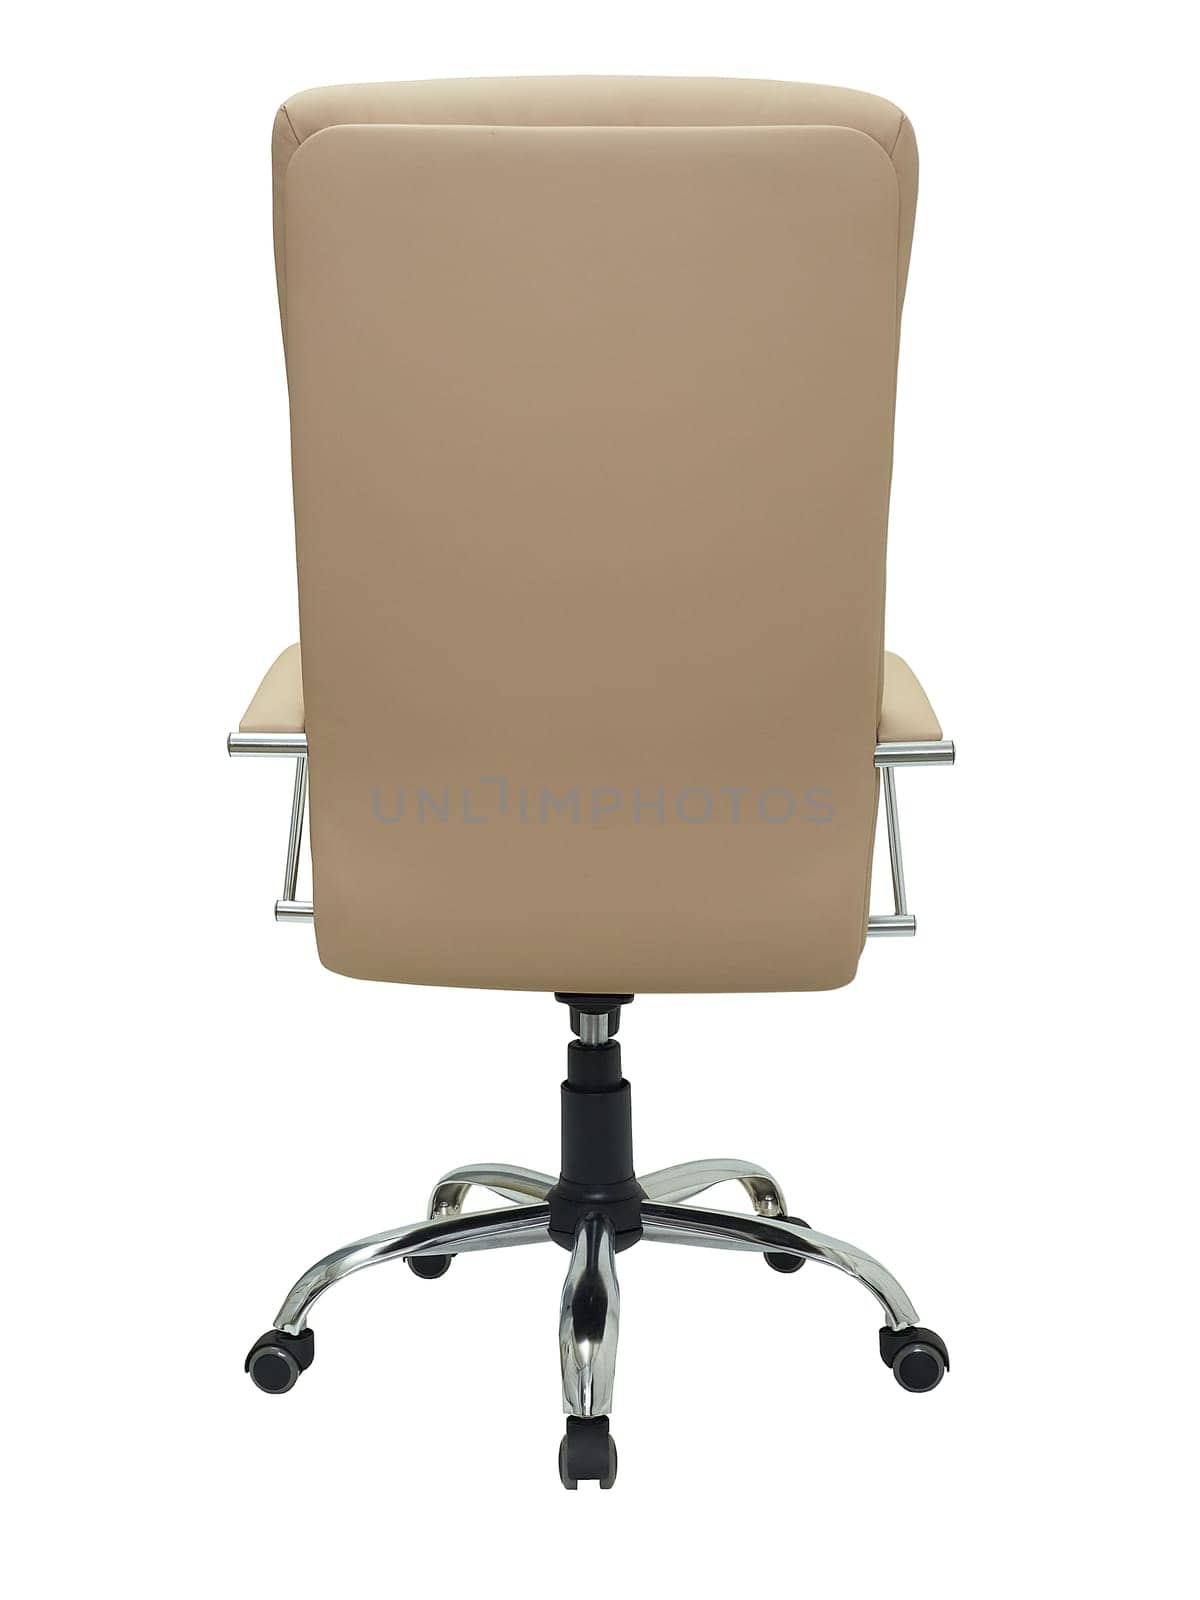 beige office armchair on wheels isolated on white background, back view. by artemzatsepilin